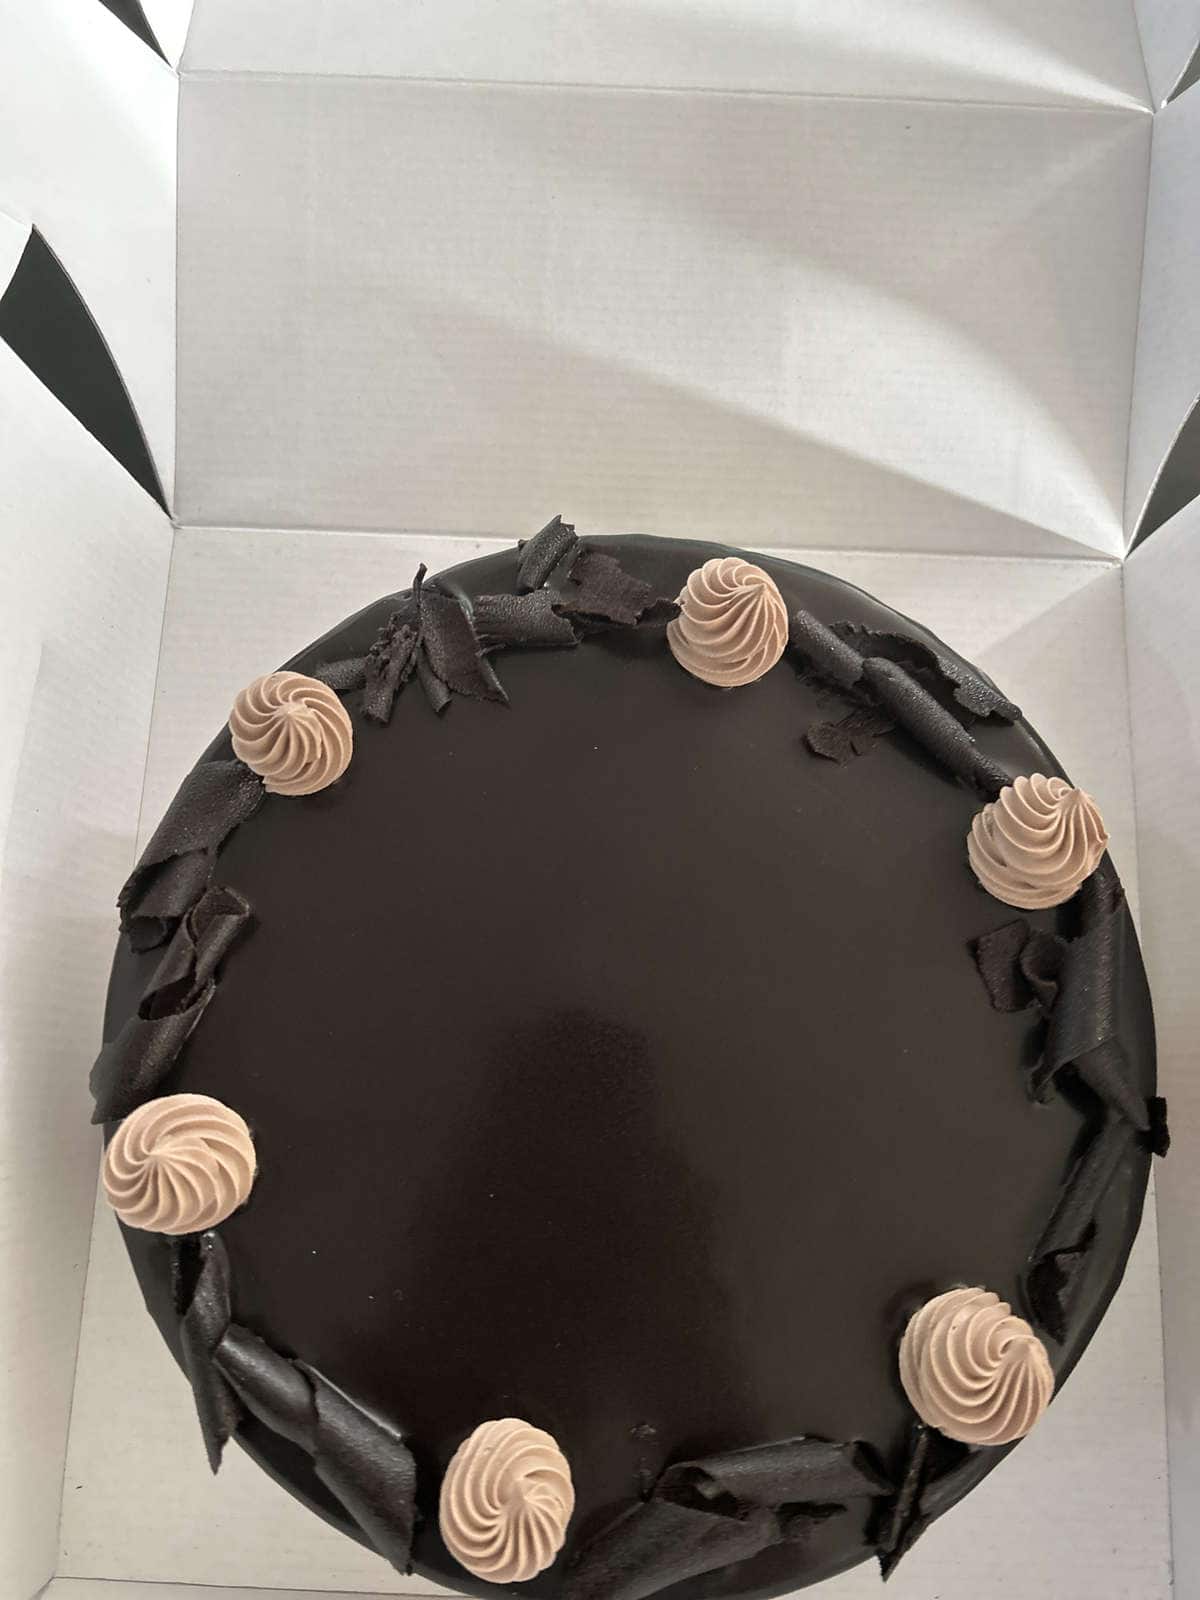 Find list of Cake Hut in Panampilly Nagar, Ernakulam - Justdial